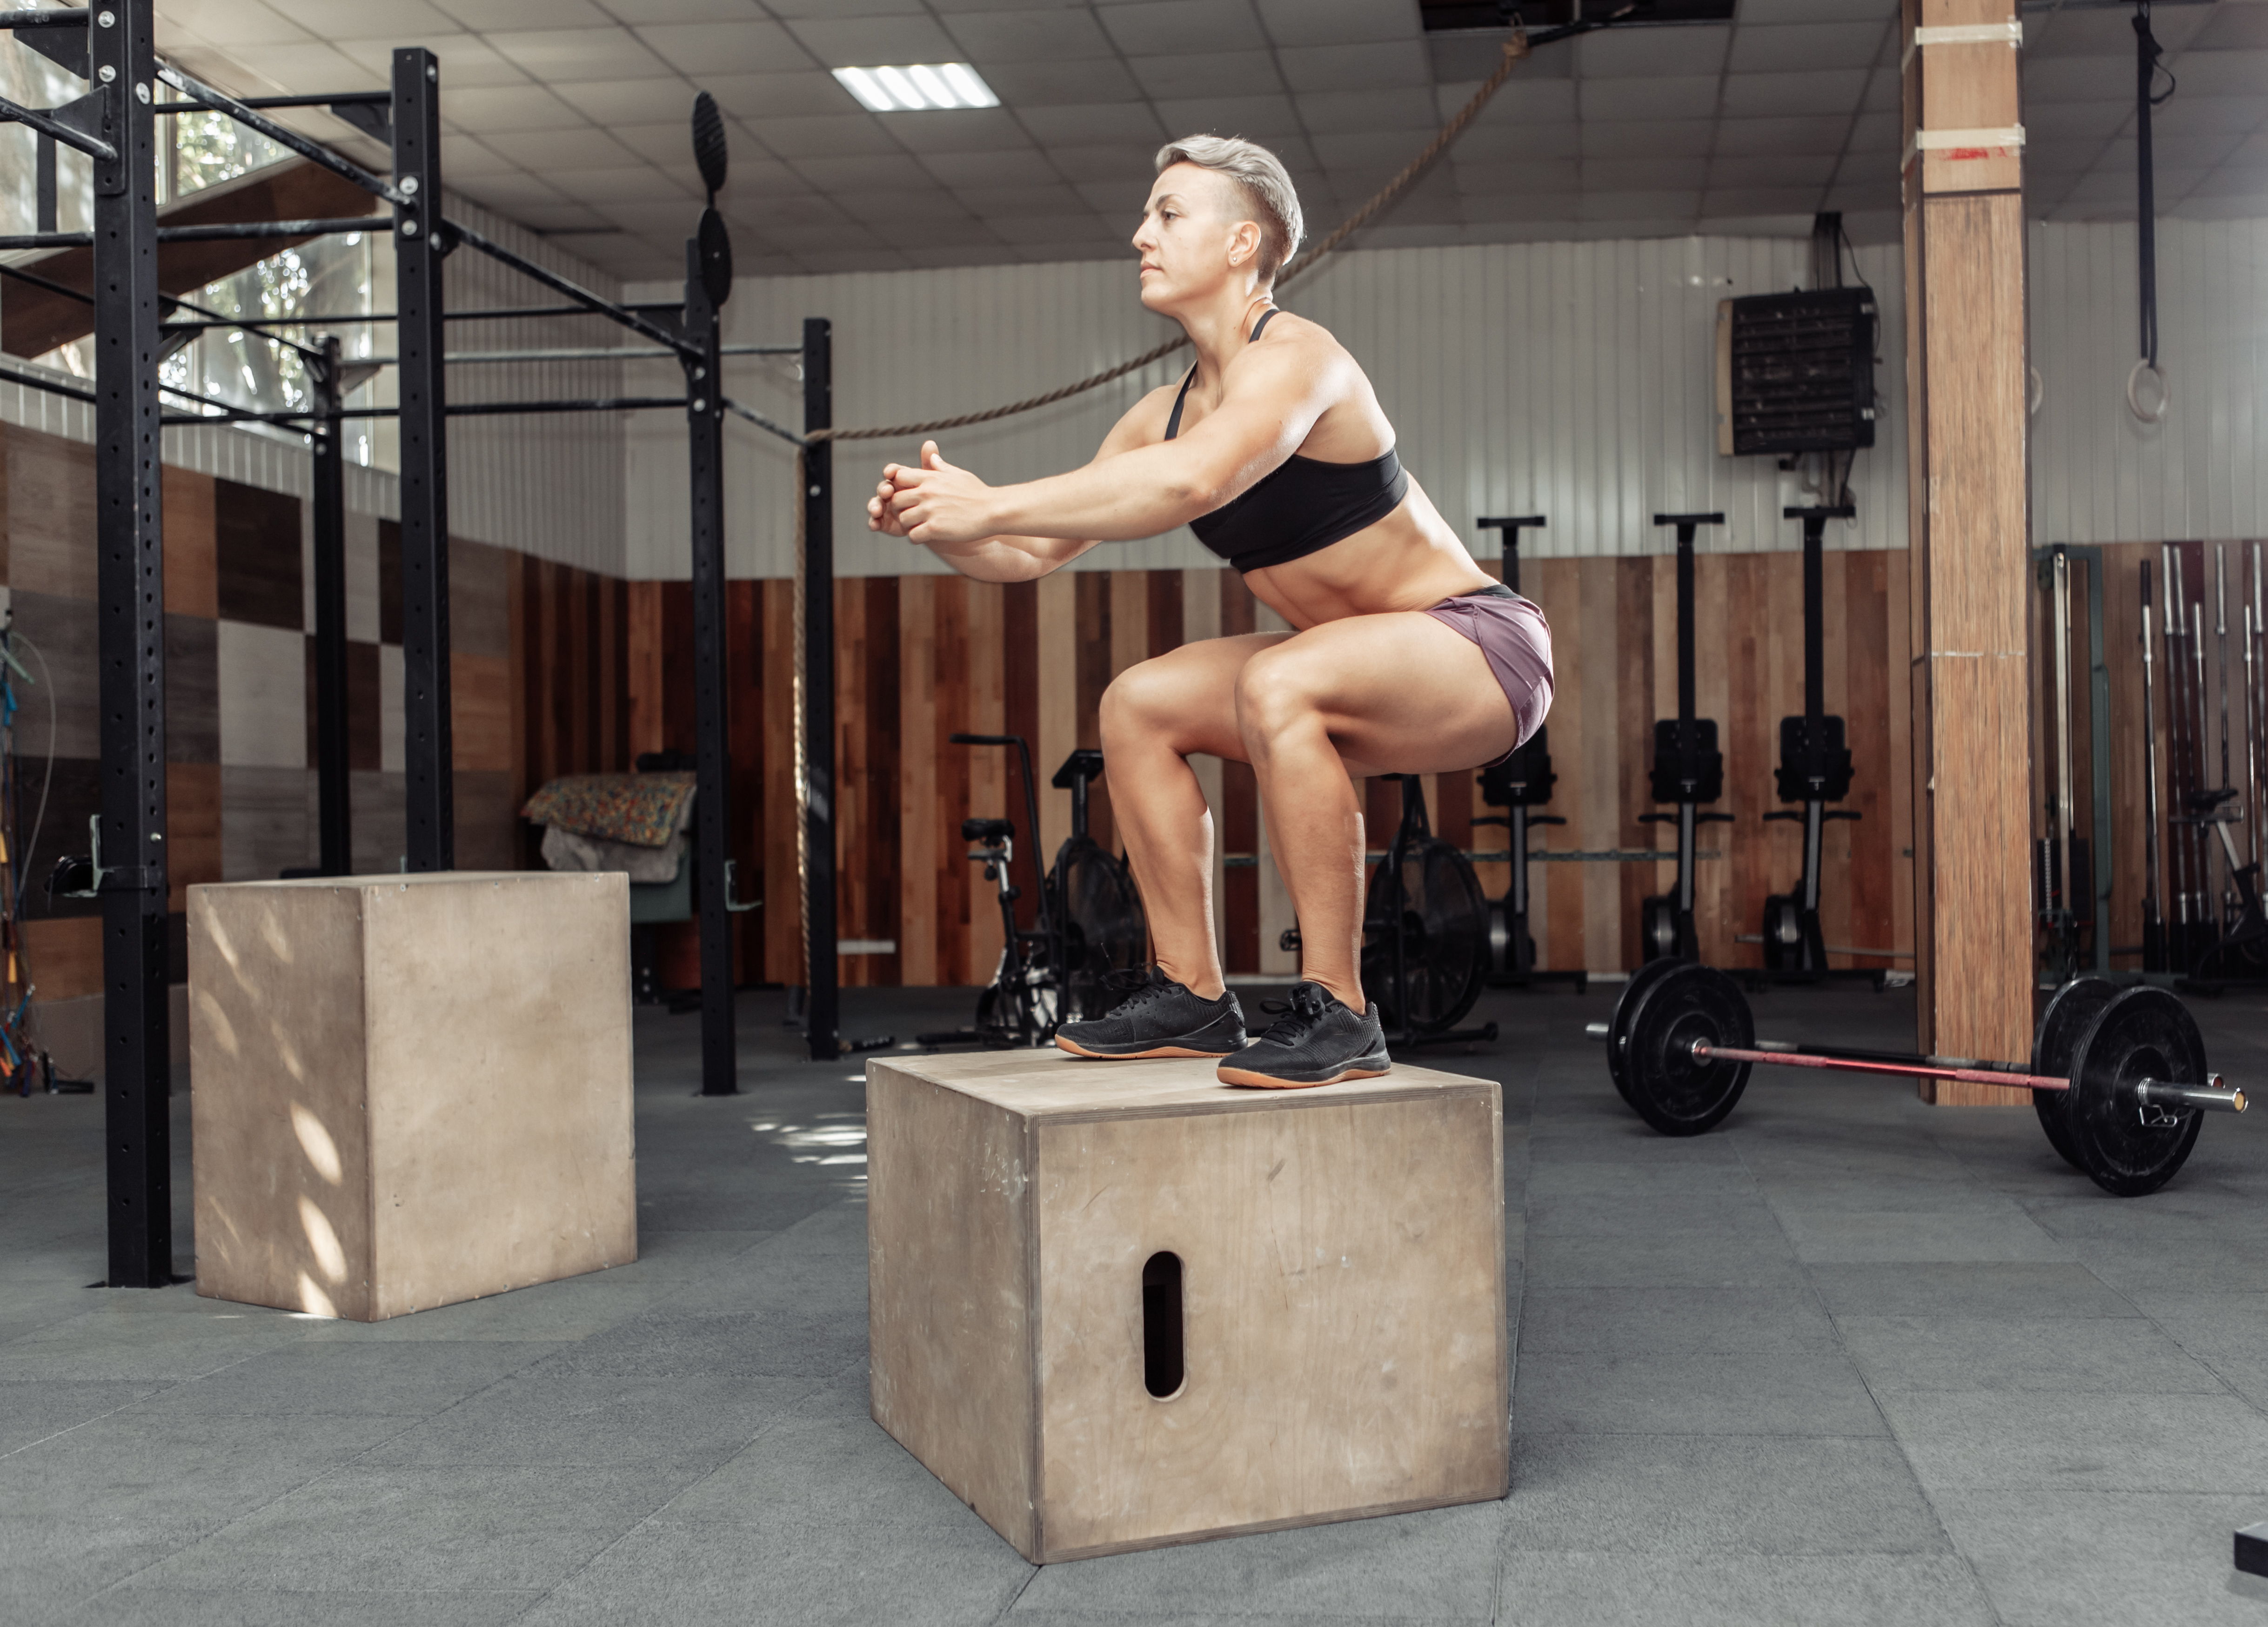 Learn how to do a box jump with our technique, setup and execution tips!